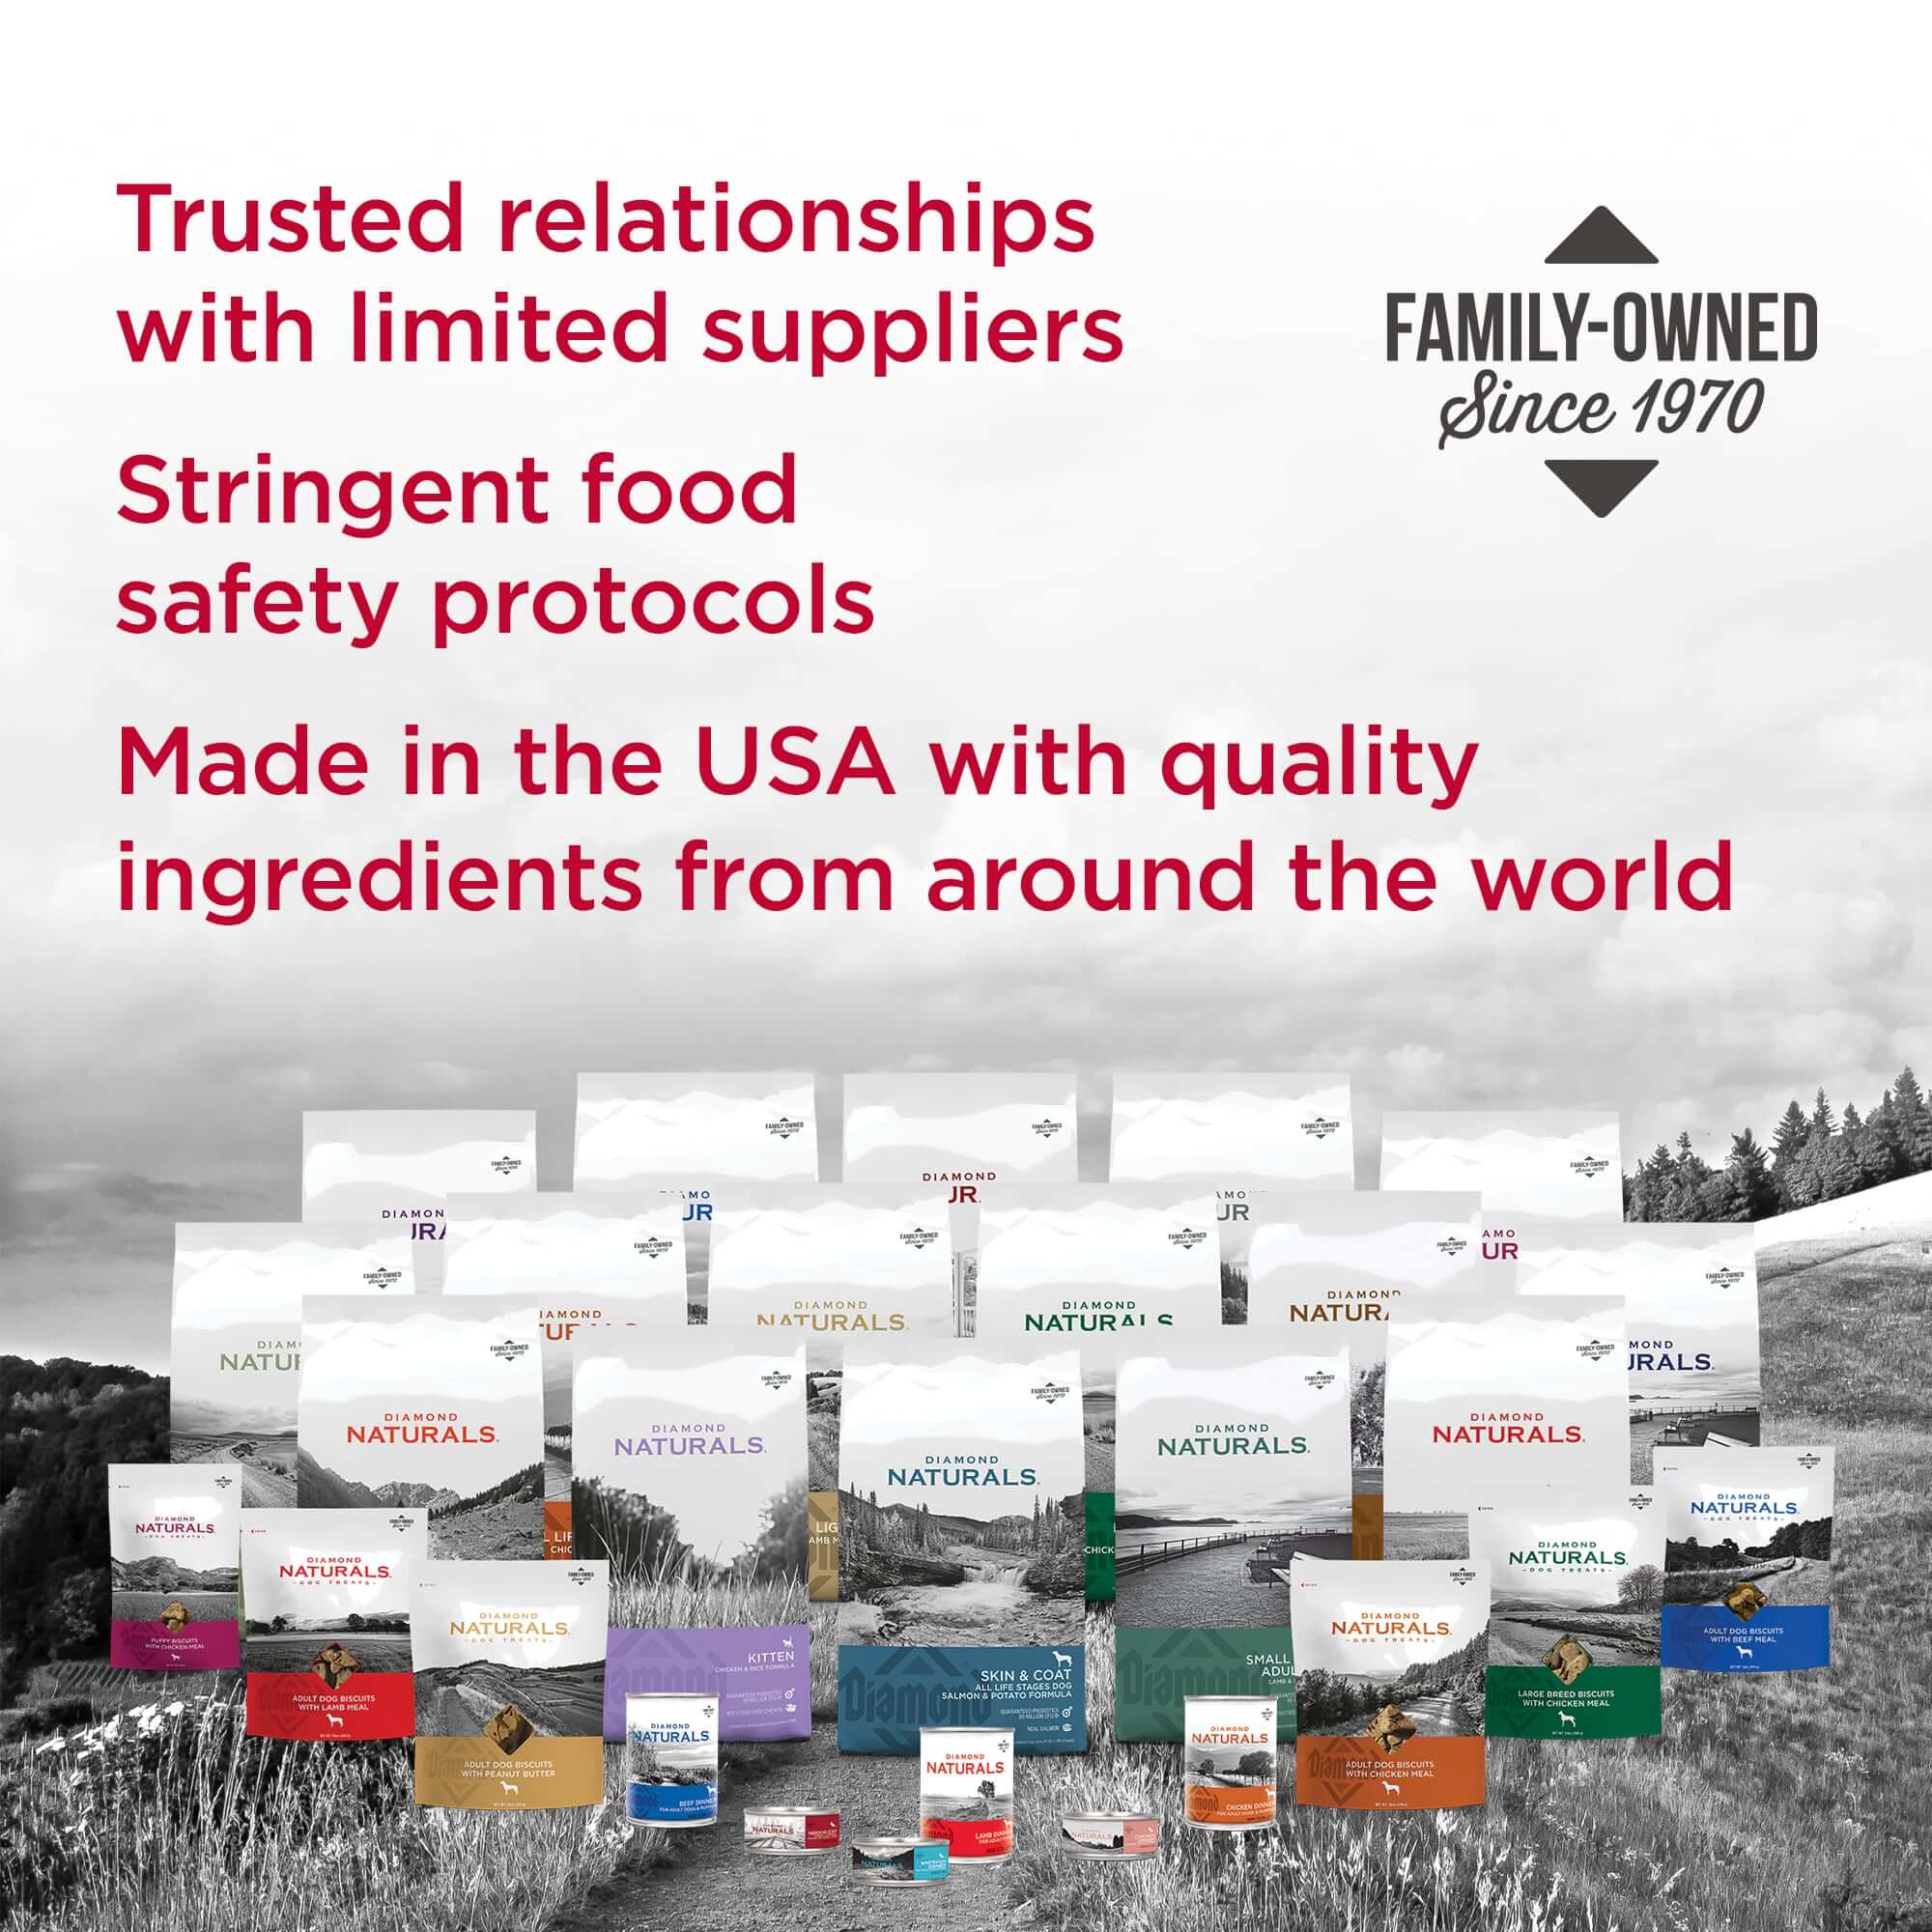 Diamond Naturals Lamb & Rice Trusted relationships with limited suppliers